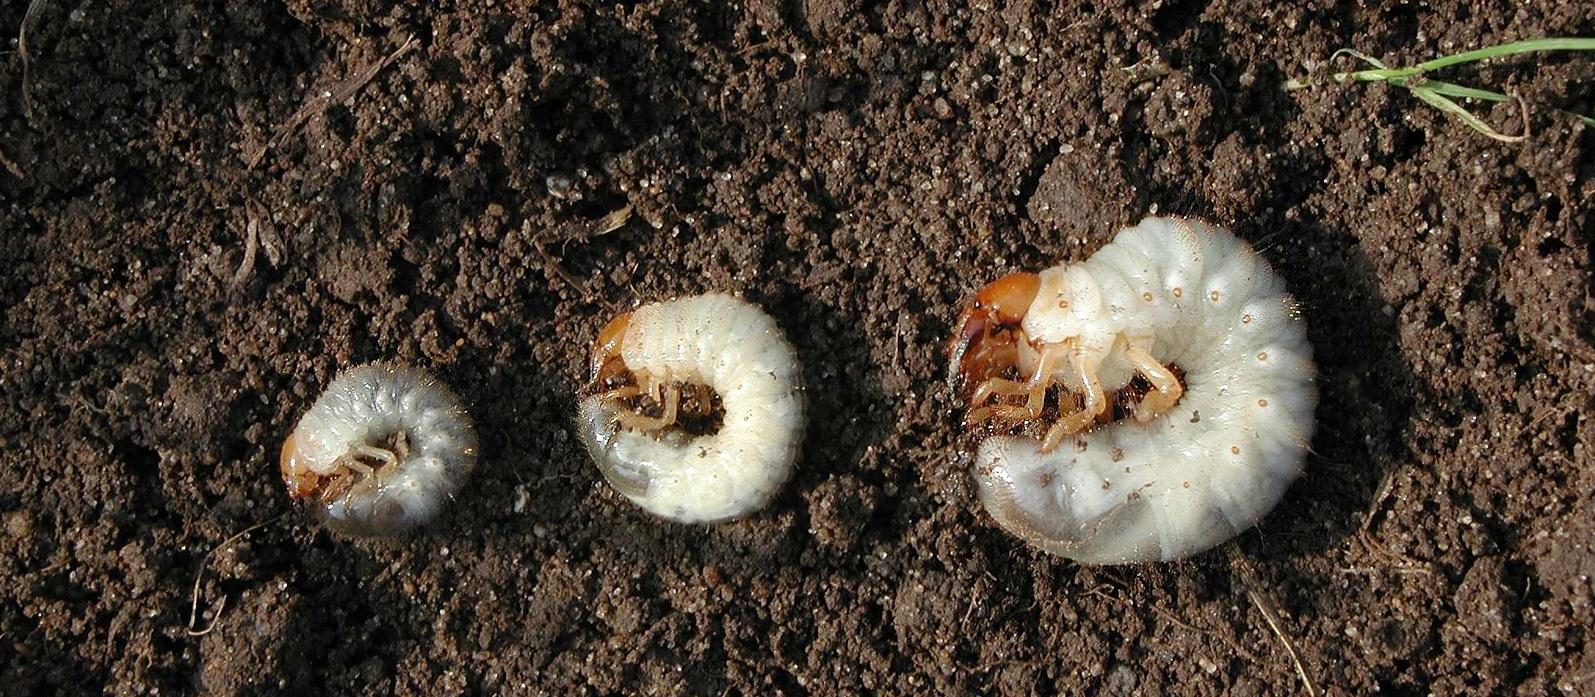 3 different species of white grubs